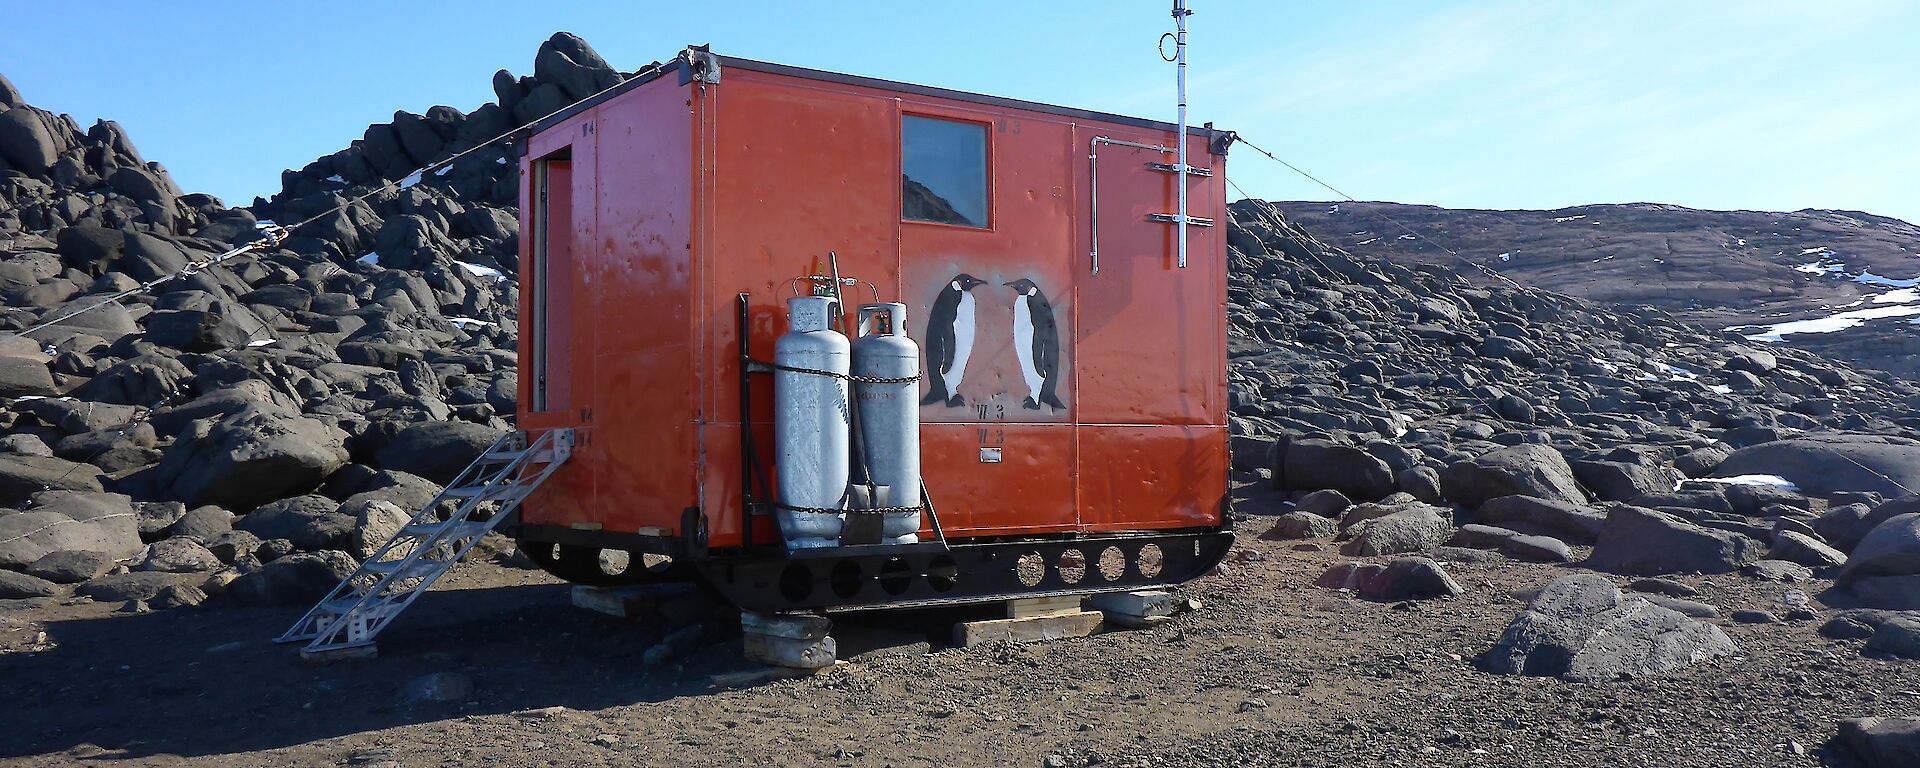 Colbeck hut sits amongst rocks. It is a brightly coloured half-sized shipping container